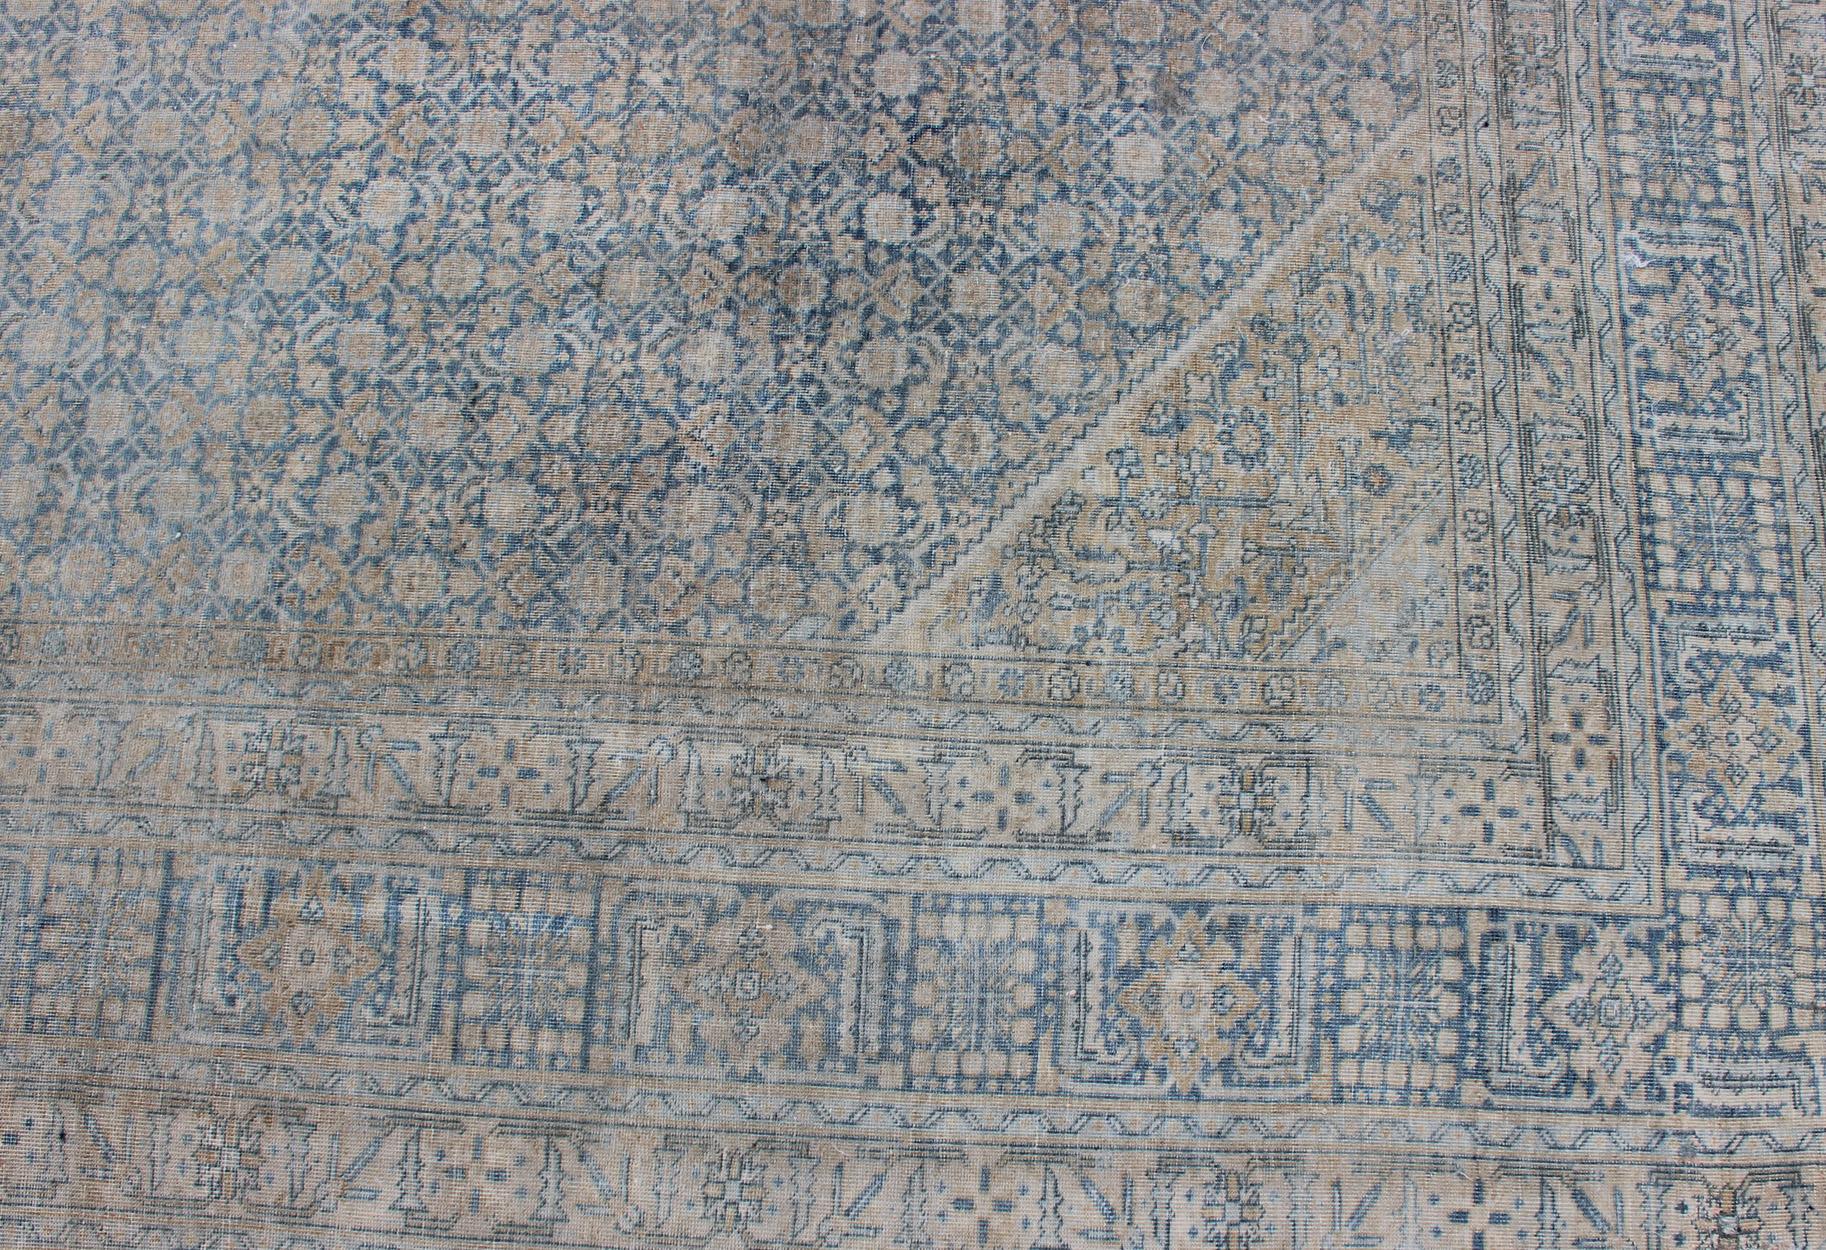 Large Antique Persian Tabriz Rug in All-Over Herati in Shades of Blue and Tan  For Sale 2